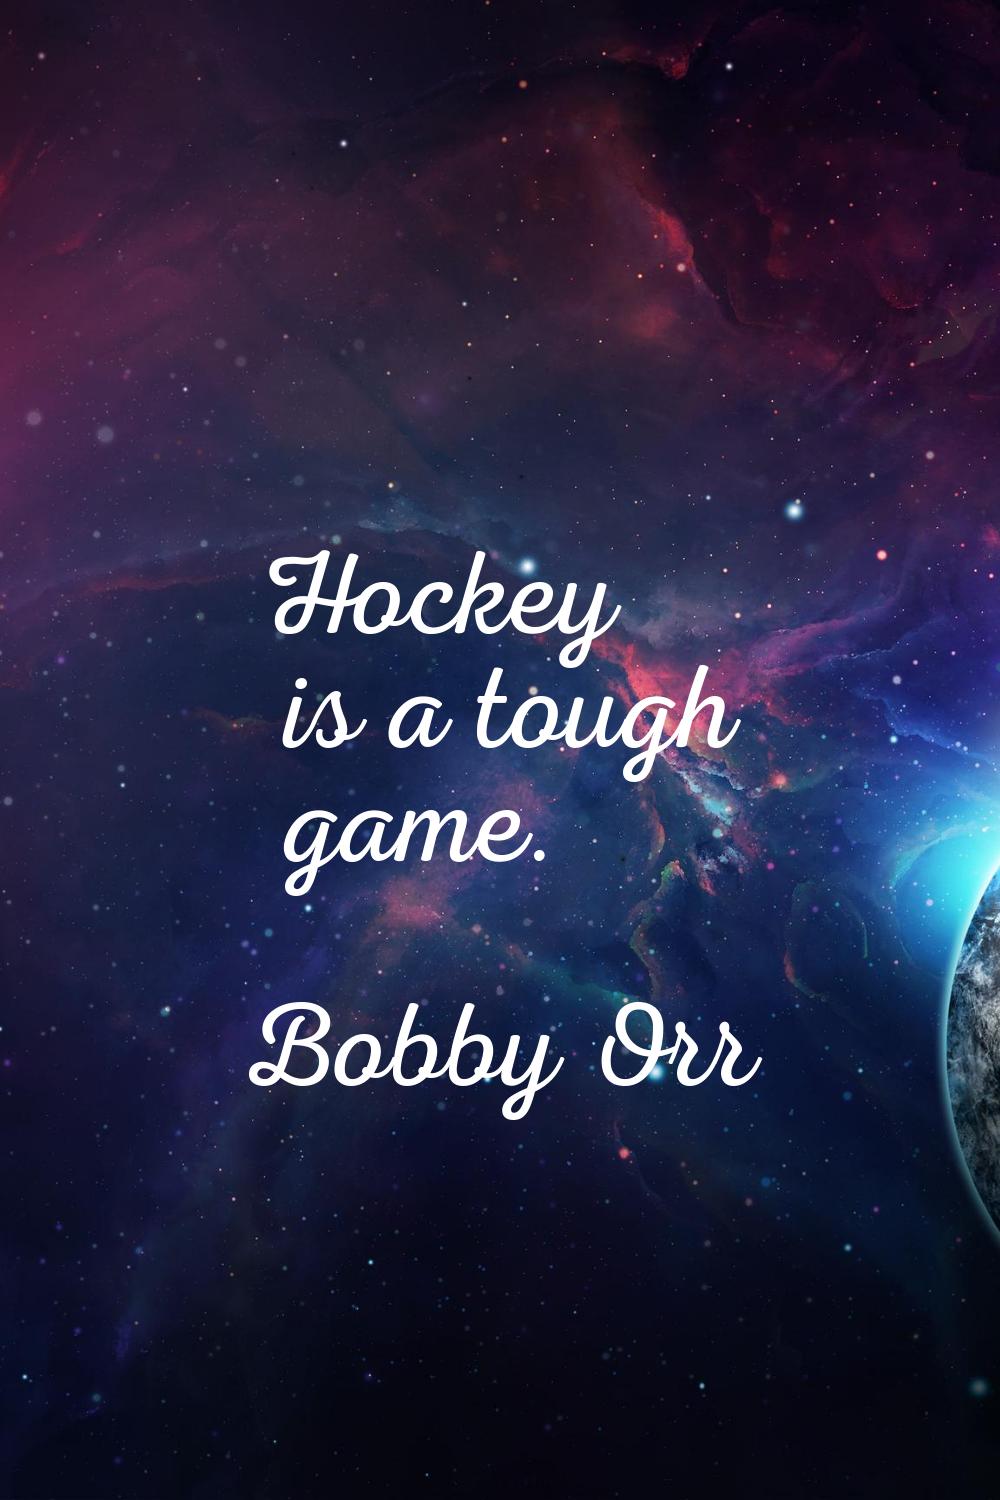 Hockey is a tough game.